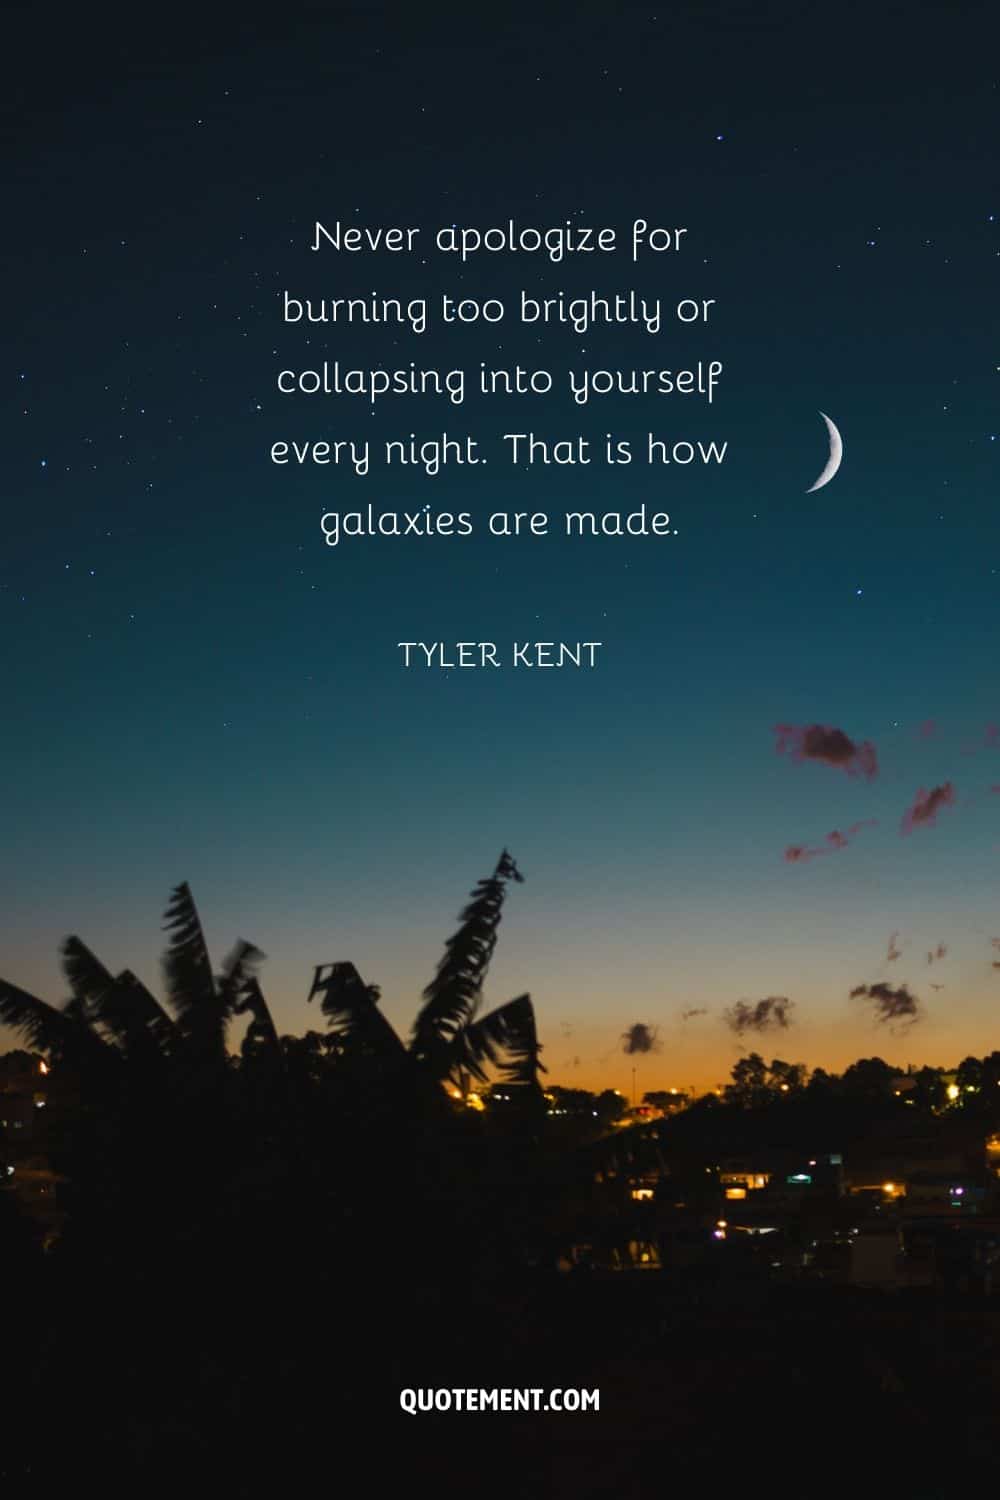 Never apologize for burning too brightly or collapsing into yourself every night.